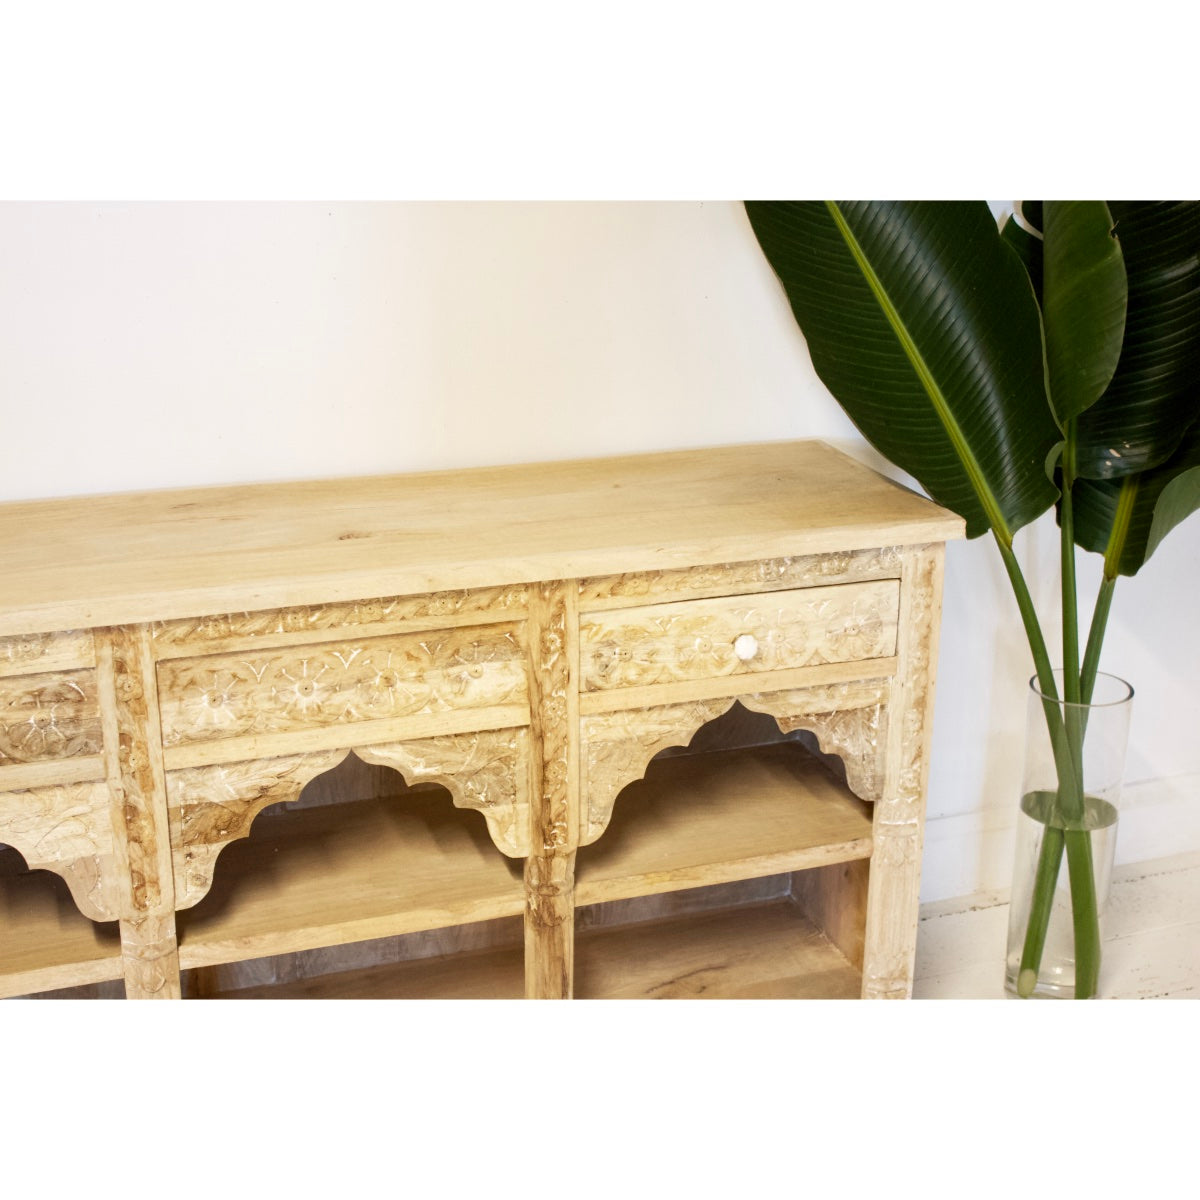 Indian Acid Wash Arch Timber Sideboard 200cm